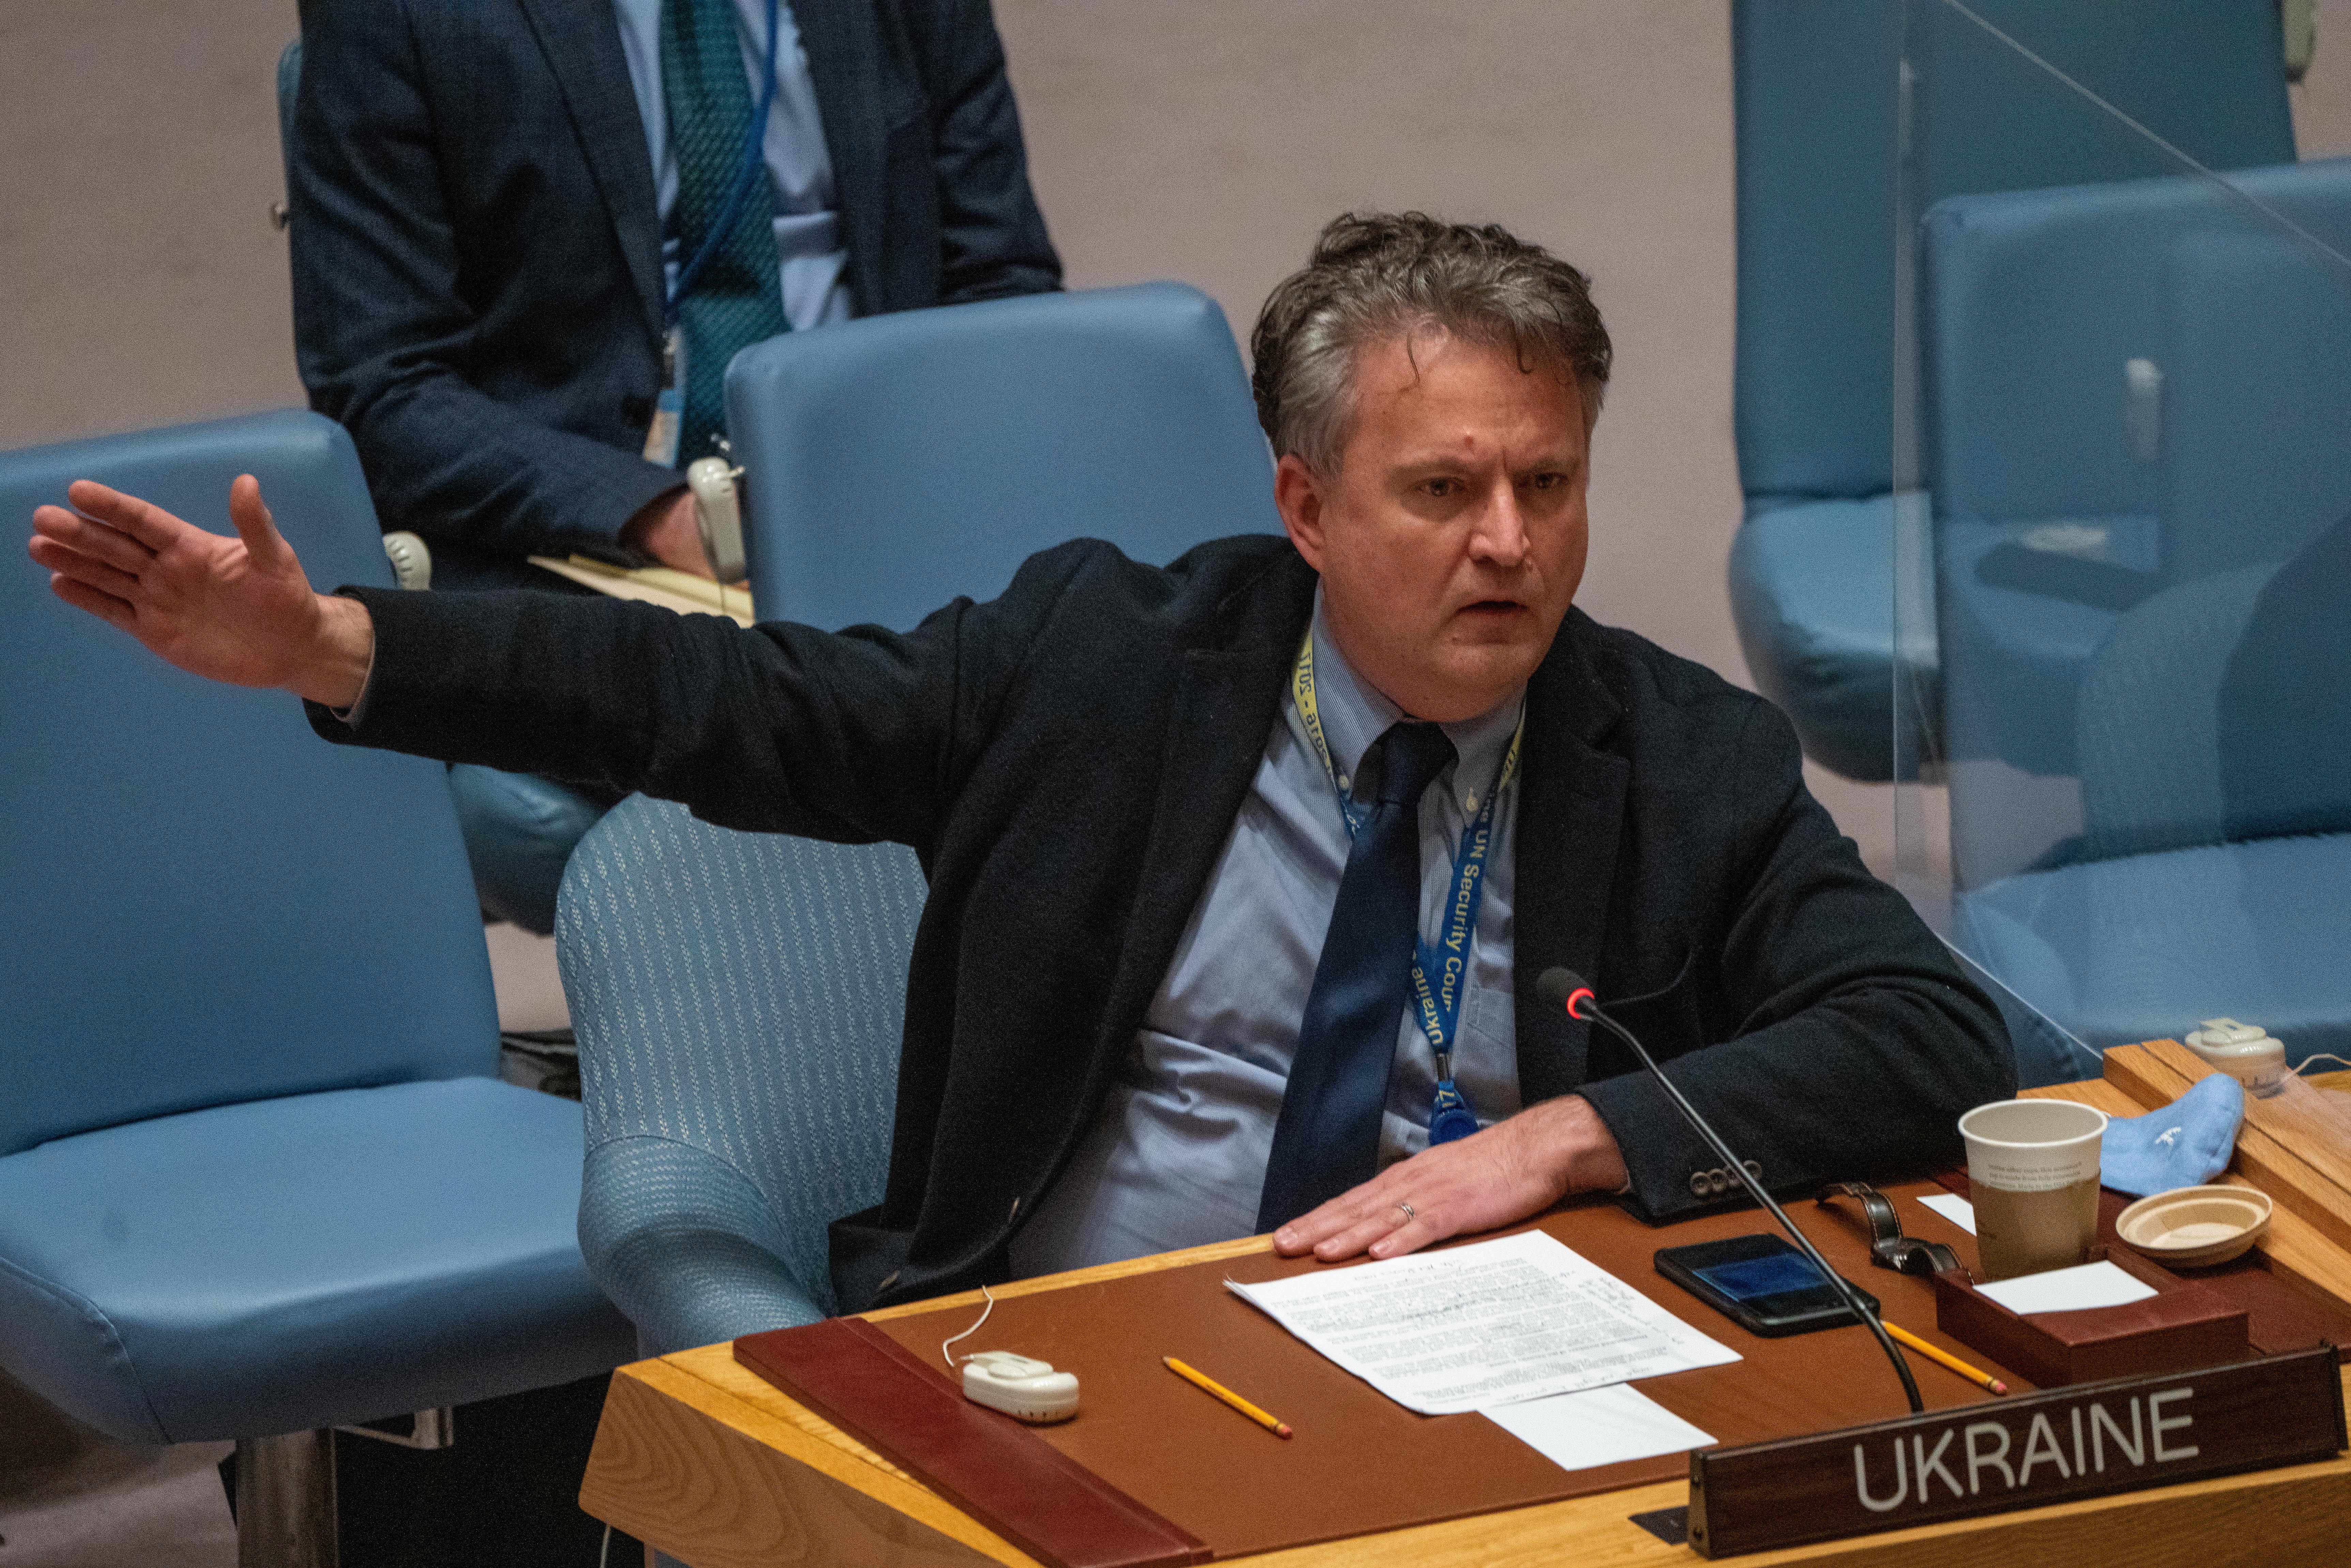 Ukraine’s envoy to UN: Entire world complicit in allowing Russia’s unlawful behavior for 30 years